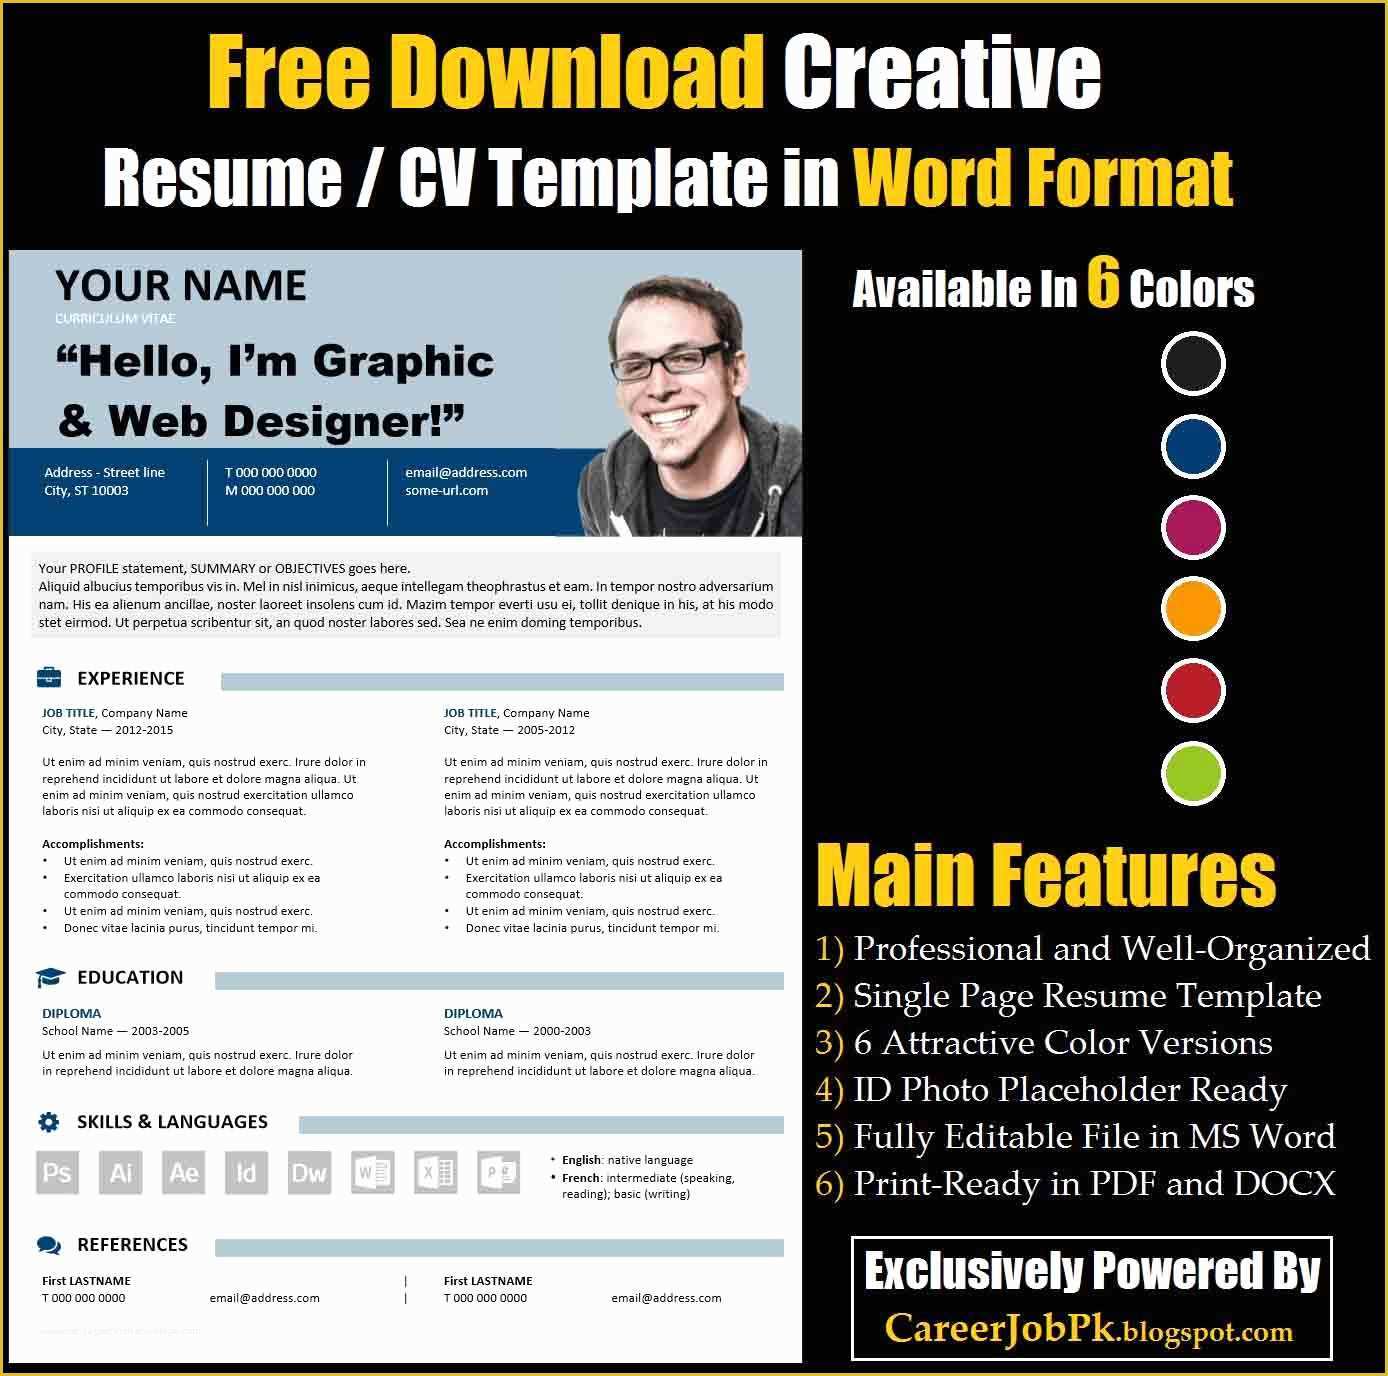 Creative Resume Templates Free Download Of Free Download Editable Resume Cv Template In Ms Word format